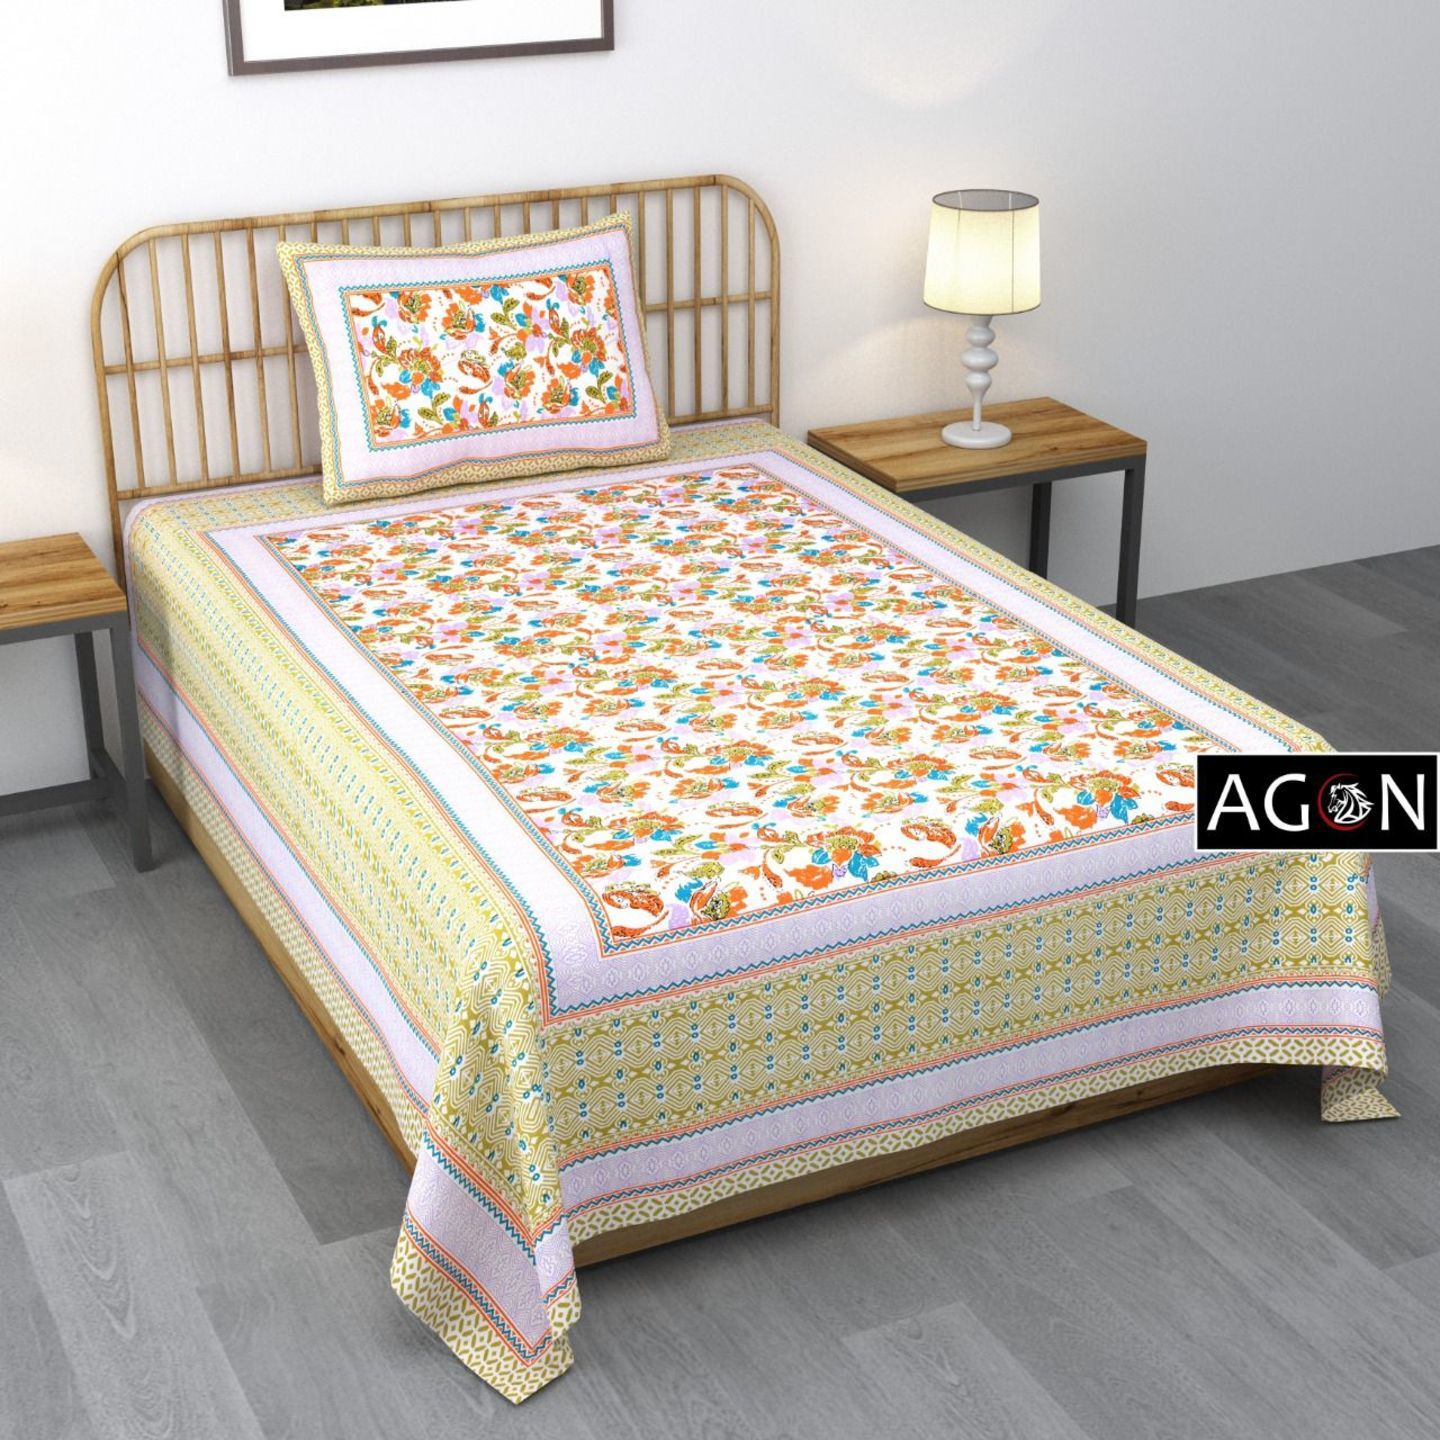 Handtex Home 144 TC Cotton Printed Single Bedsheet with 1 Pillow Cover Multicolor